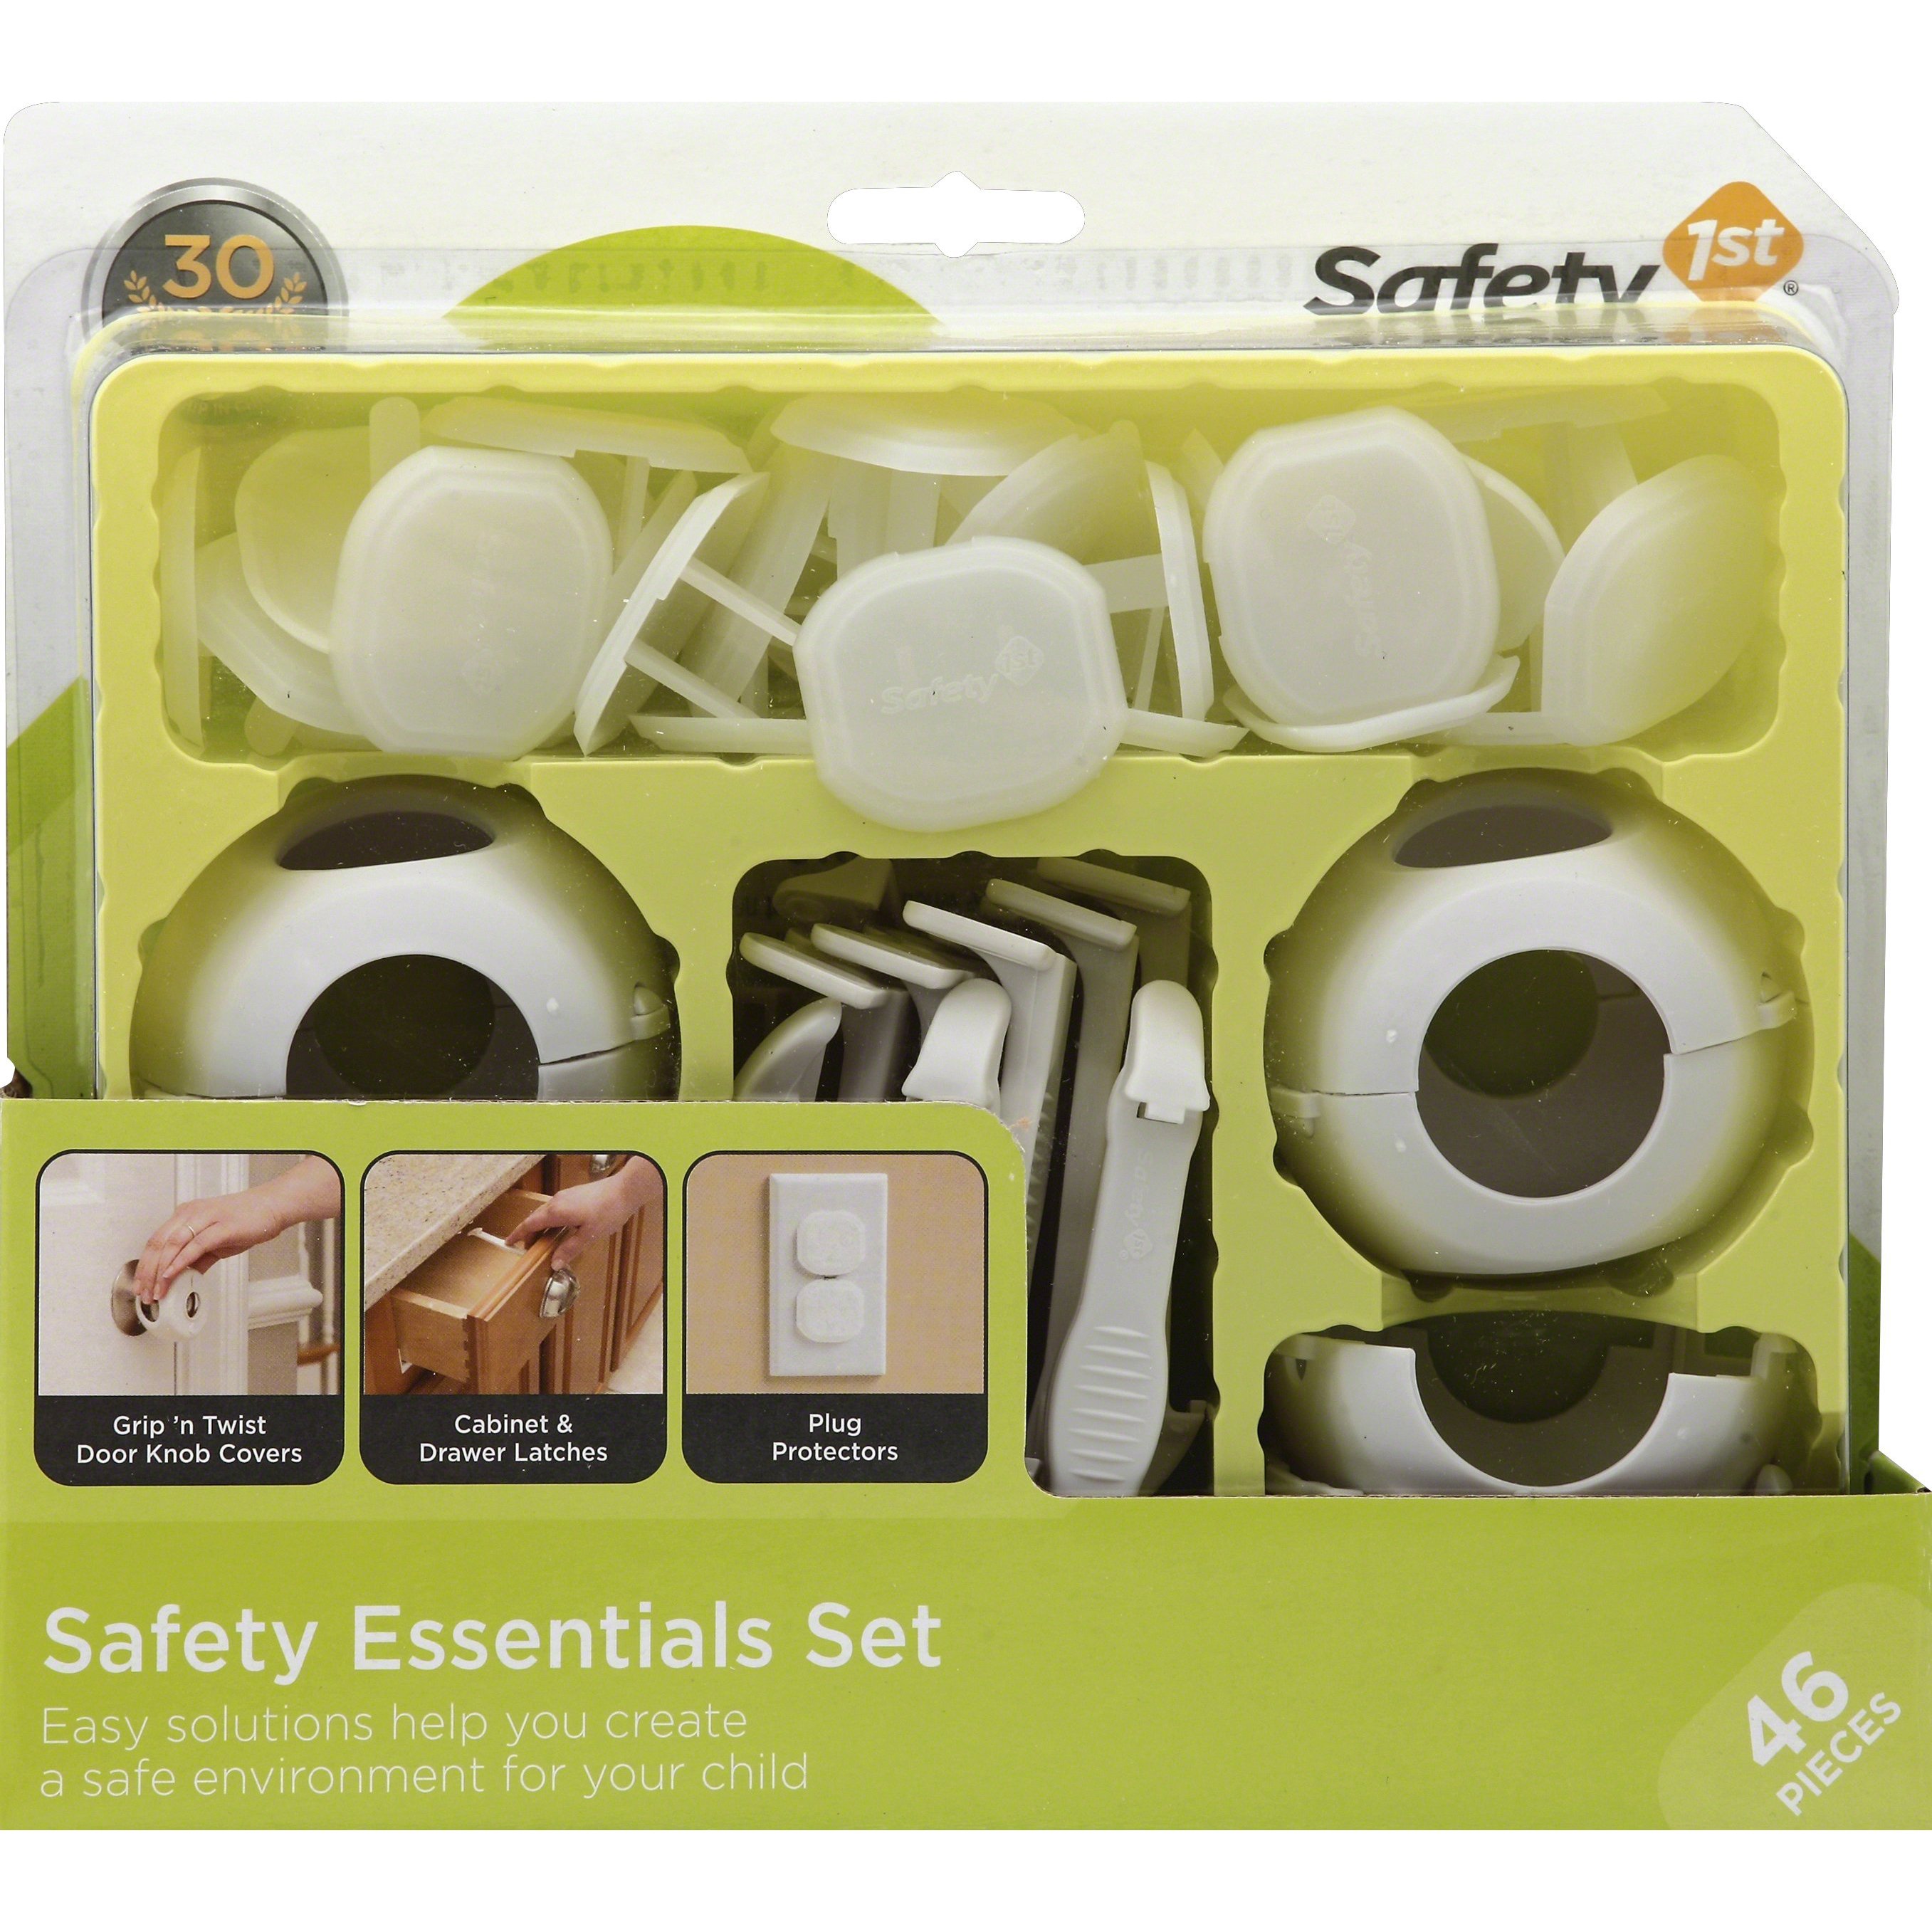 Safety 1st Safety Essentials Kit - Shop Baby Safety at H-E-B